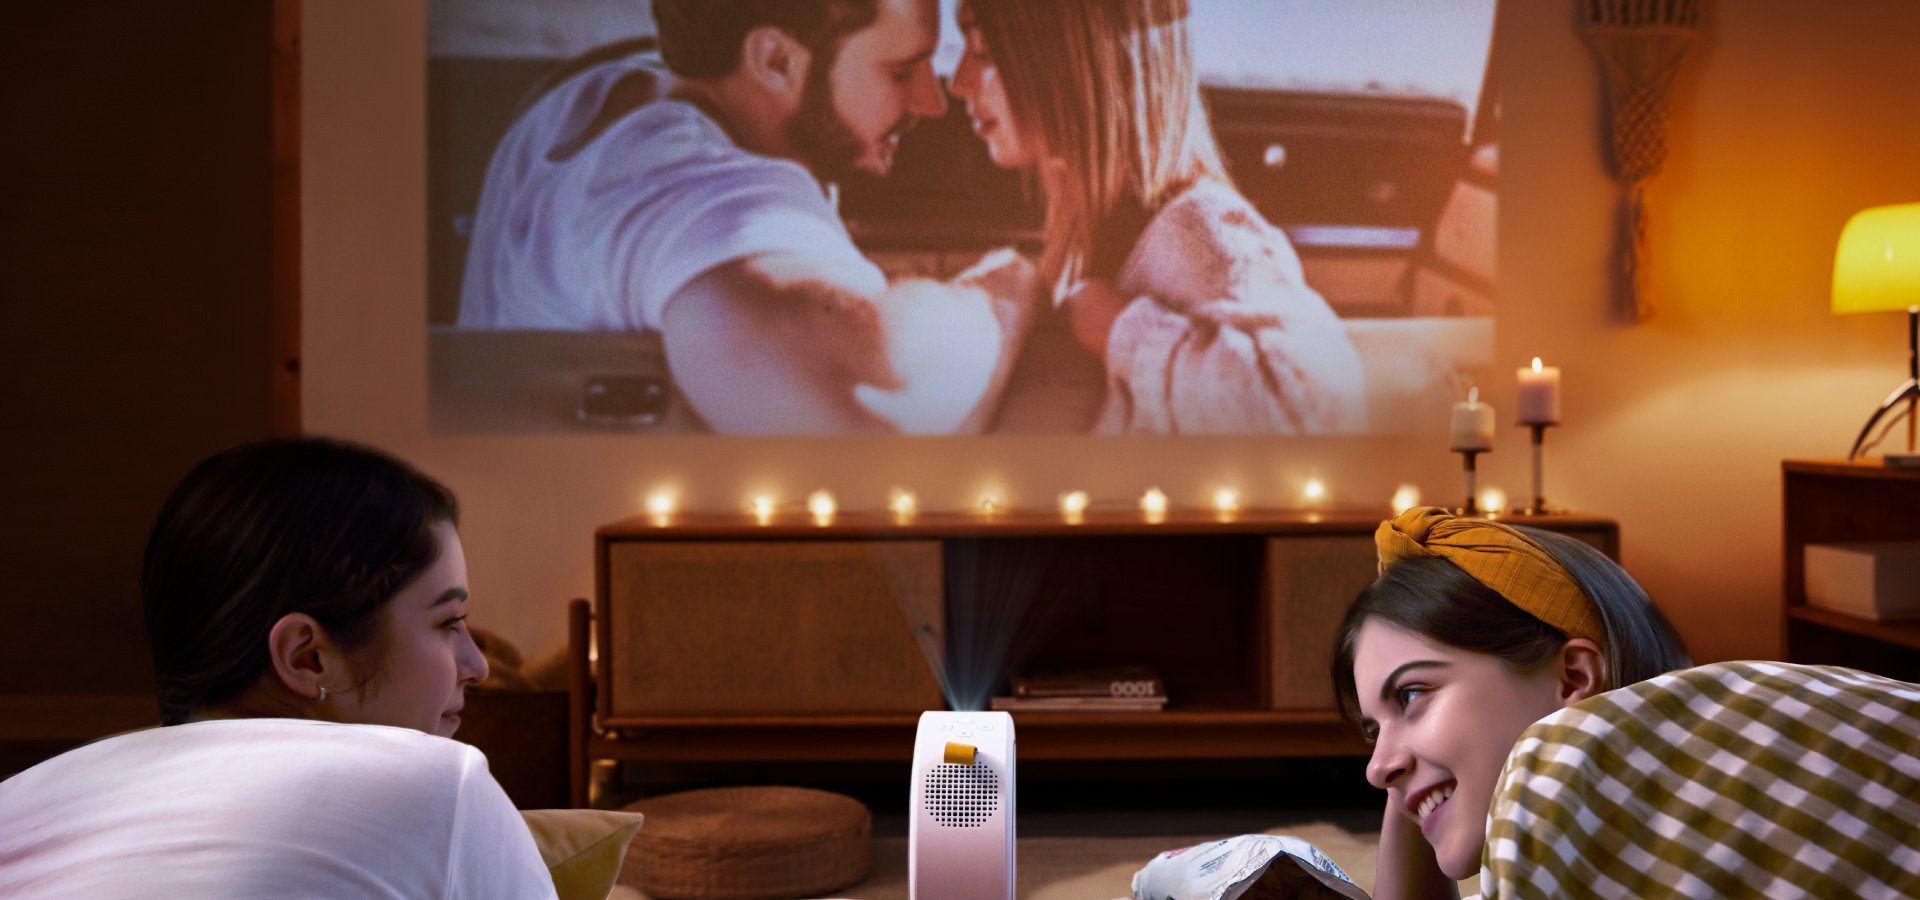 BenQ portable projector GV30 supports Android TV for your binge-watching.